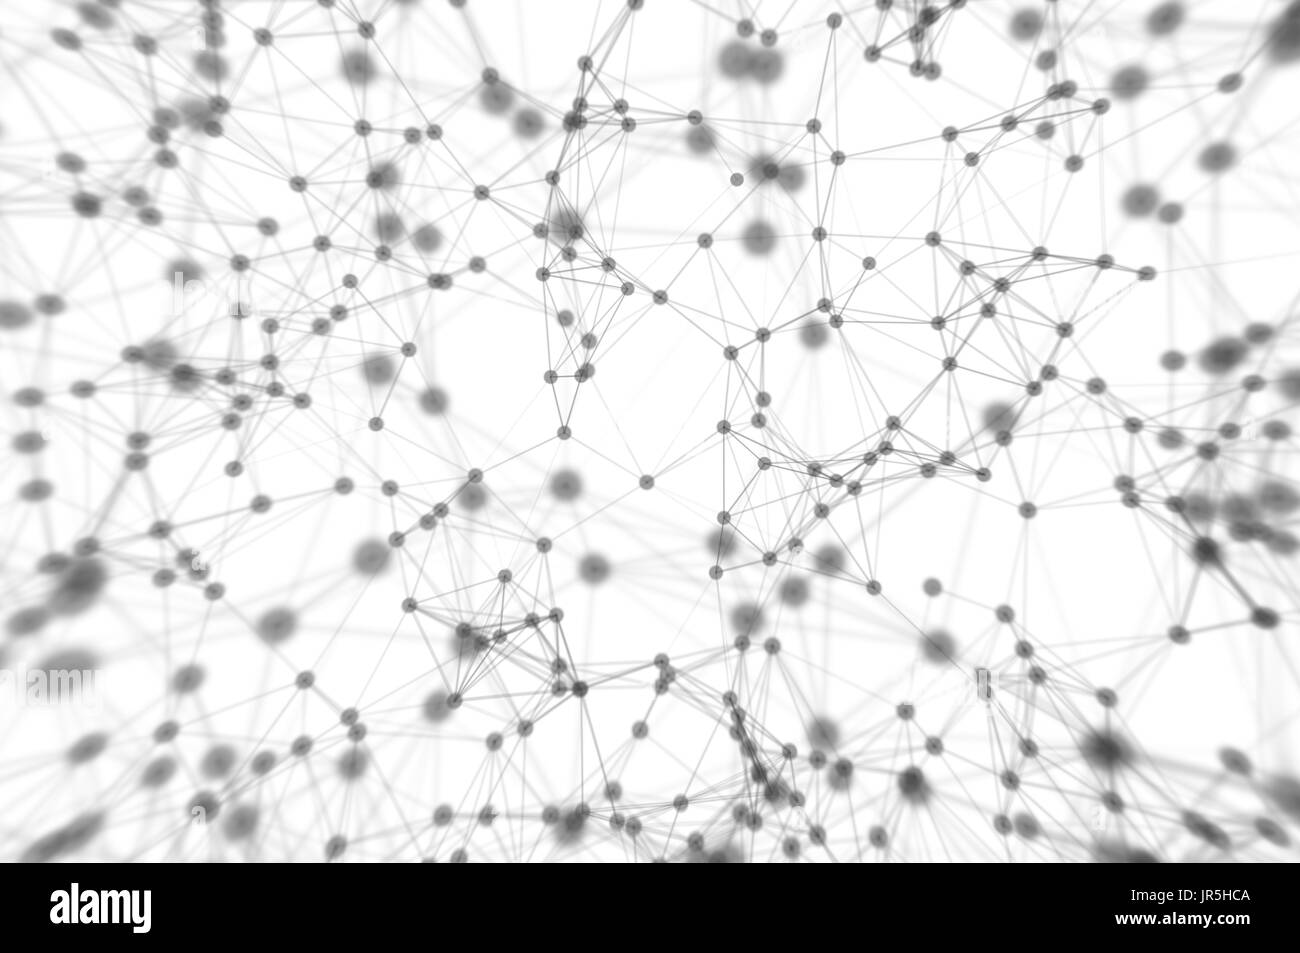 Communication social mesh. Network perspective polygonal background. Stock Photo